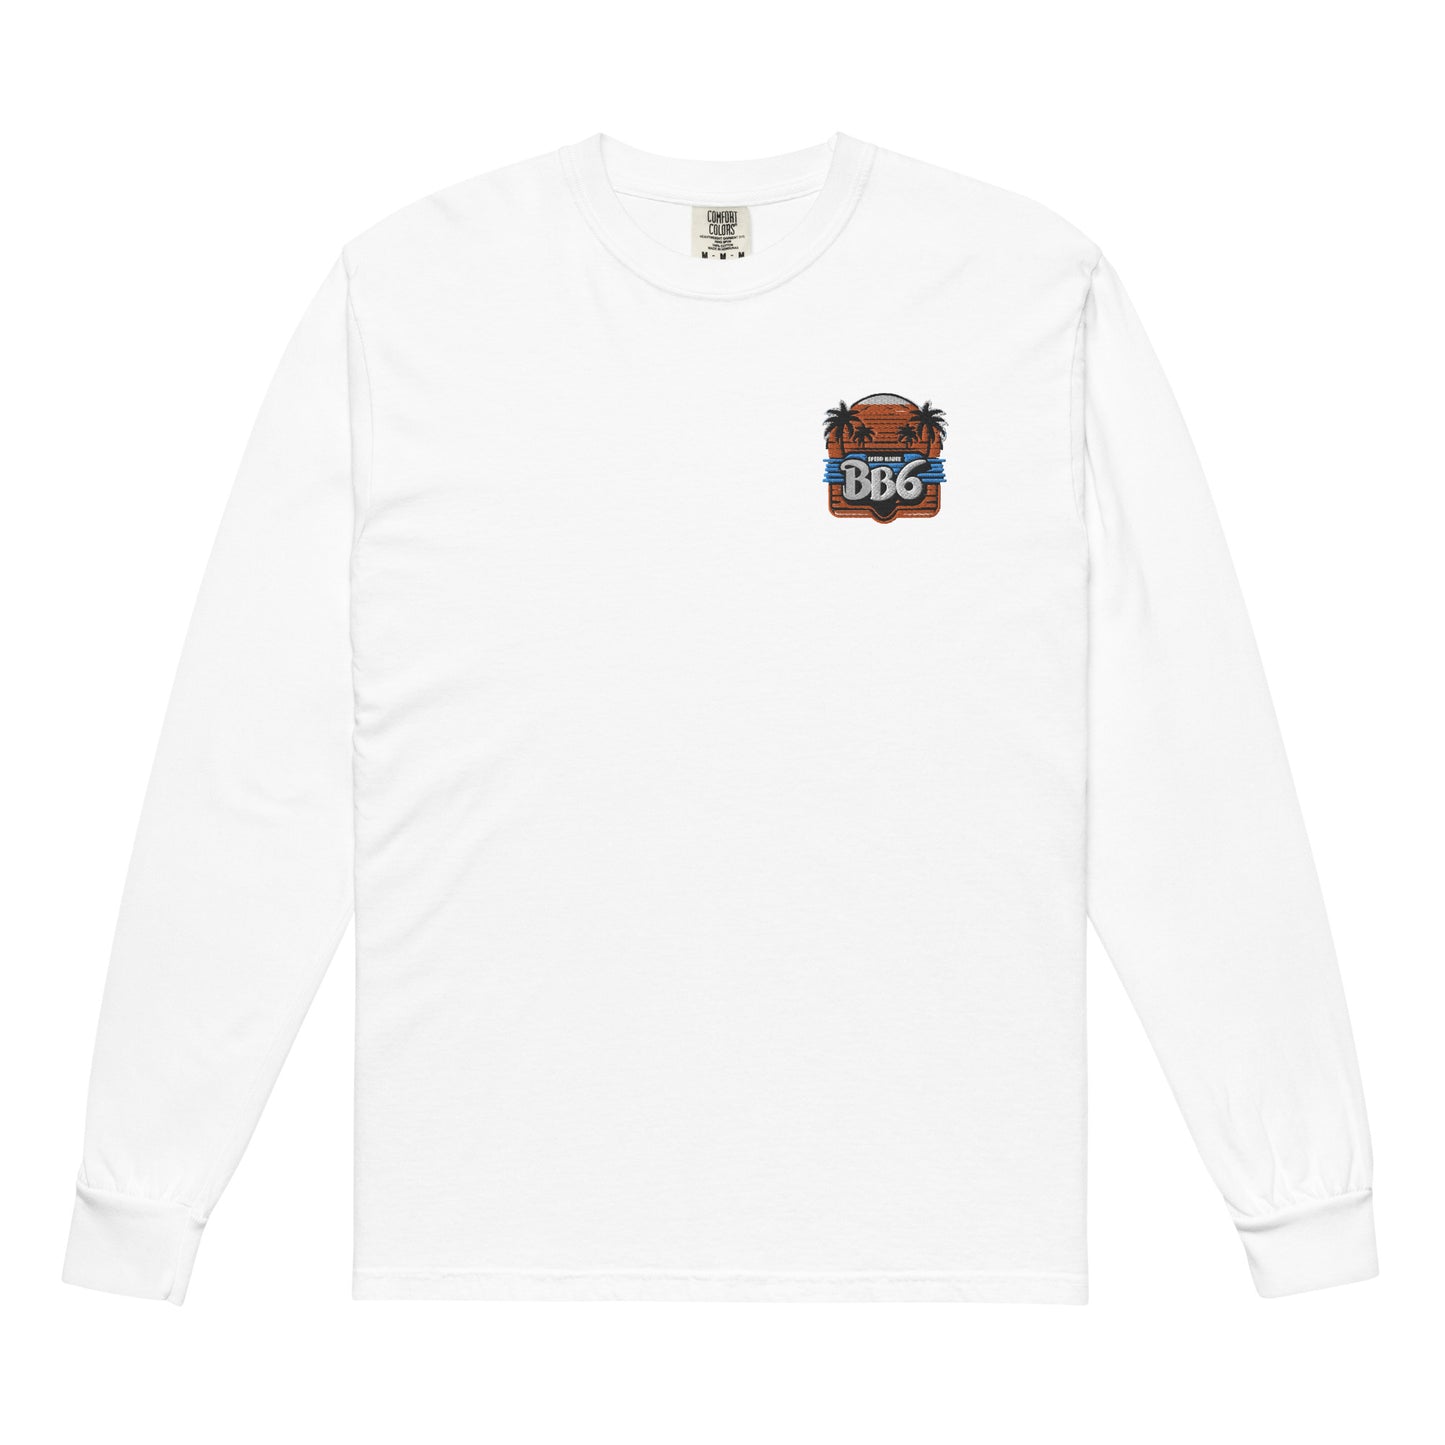 BB6 Embroidery logo with Garment-dyed Heavyweight long-sleeve shirt